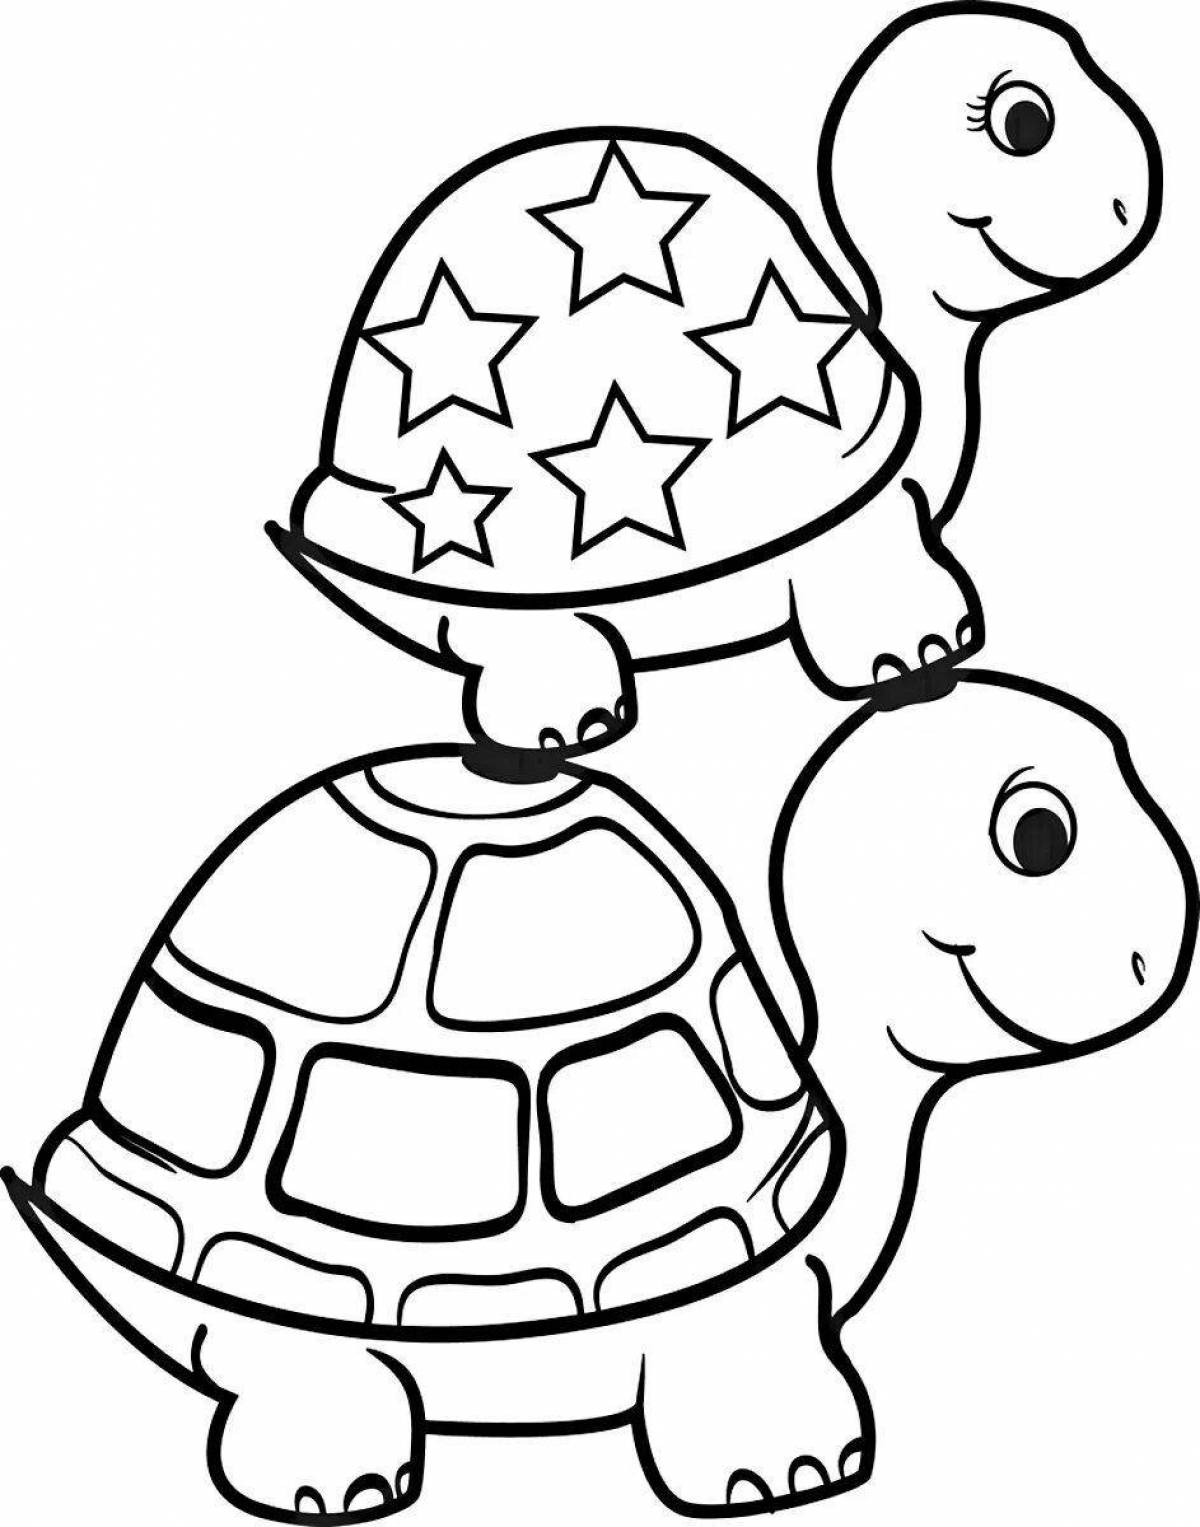 Funny coloring pages of turtles